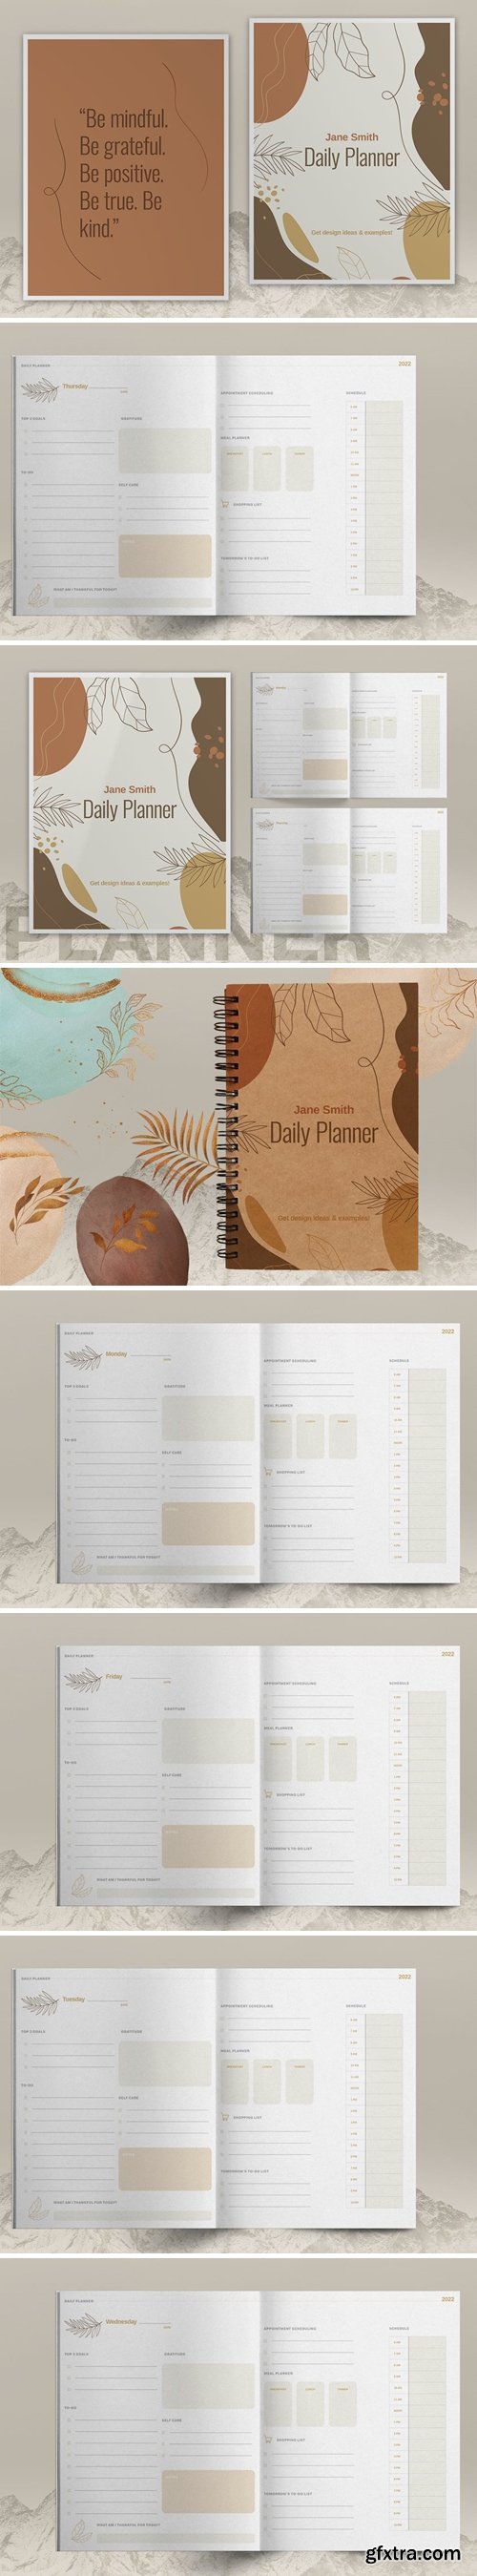 Daily Planner Brochure Template